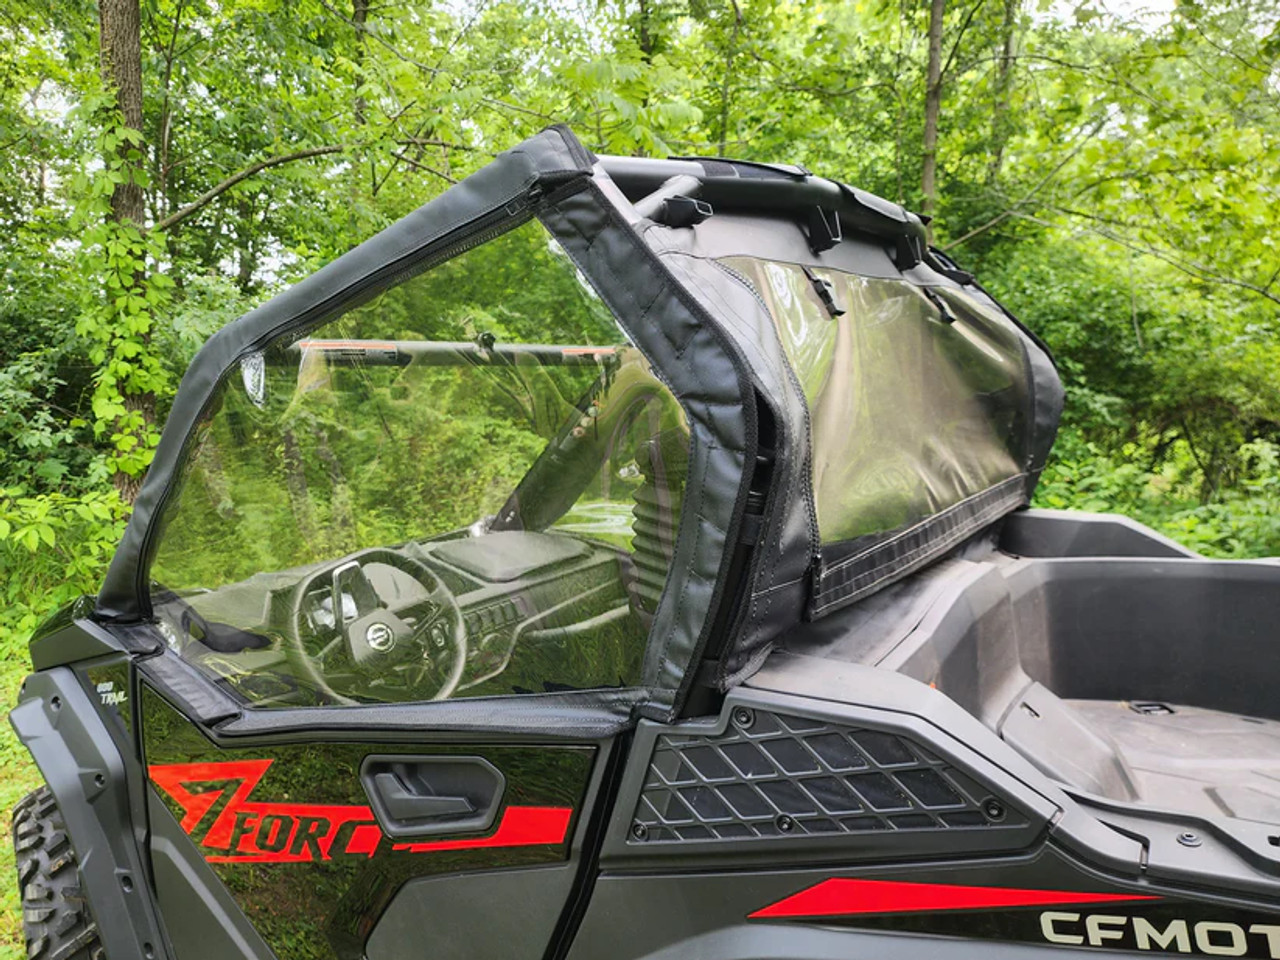 3 Star side x side CF Moto Z-Force 800 Trail 950 Sport and Trail upper doors and rear window